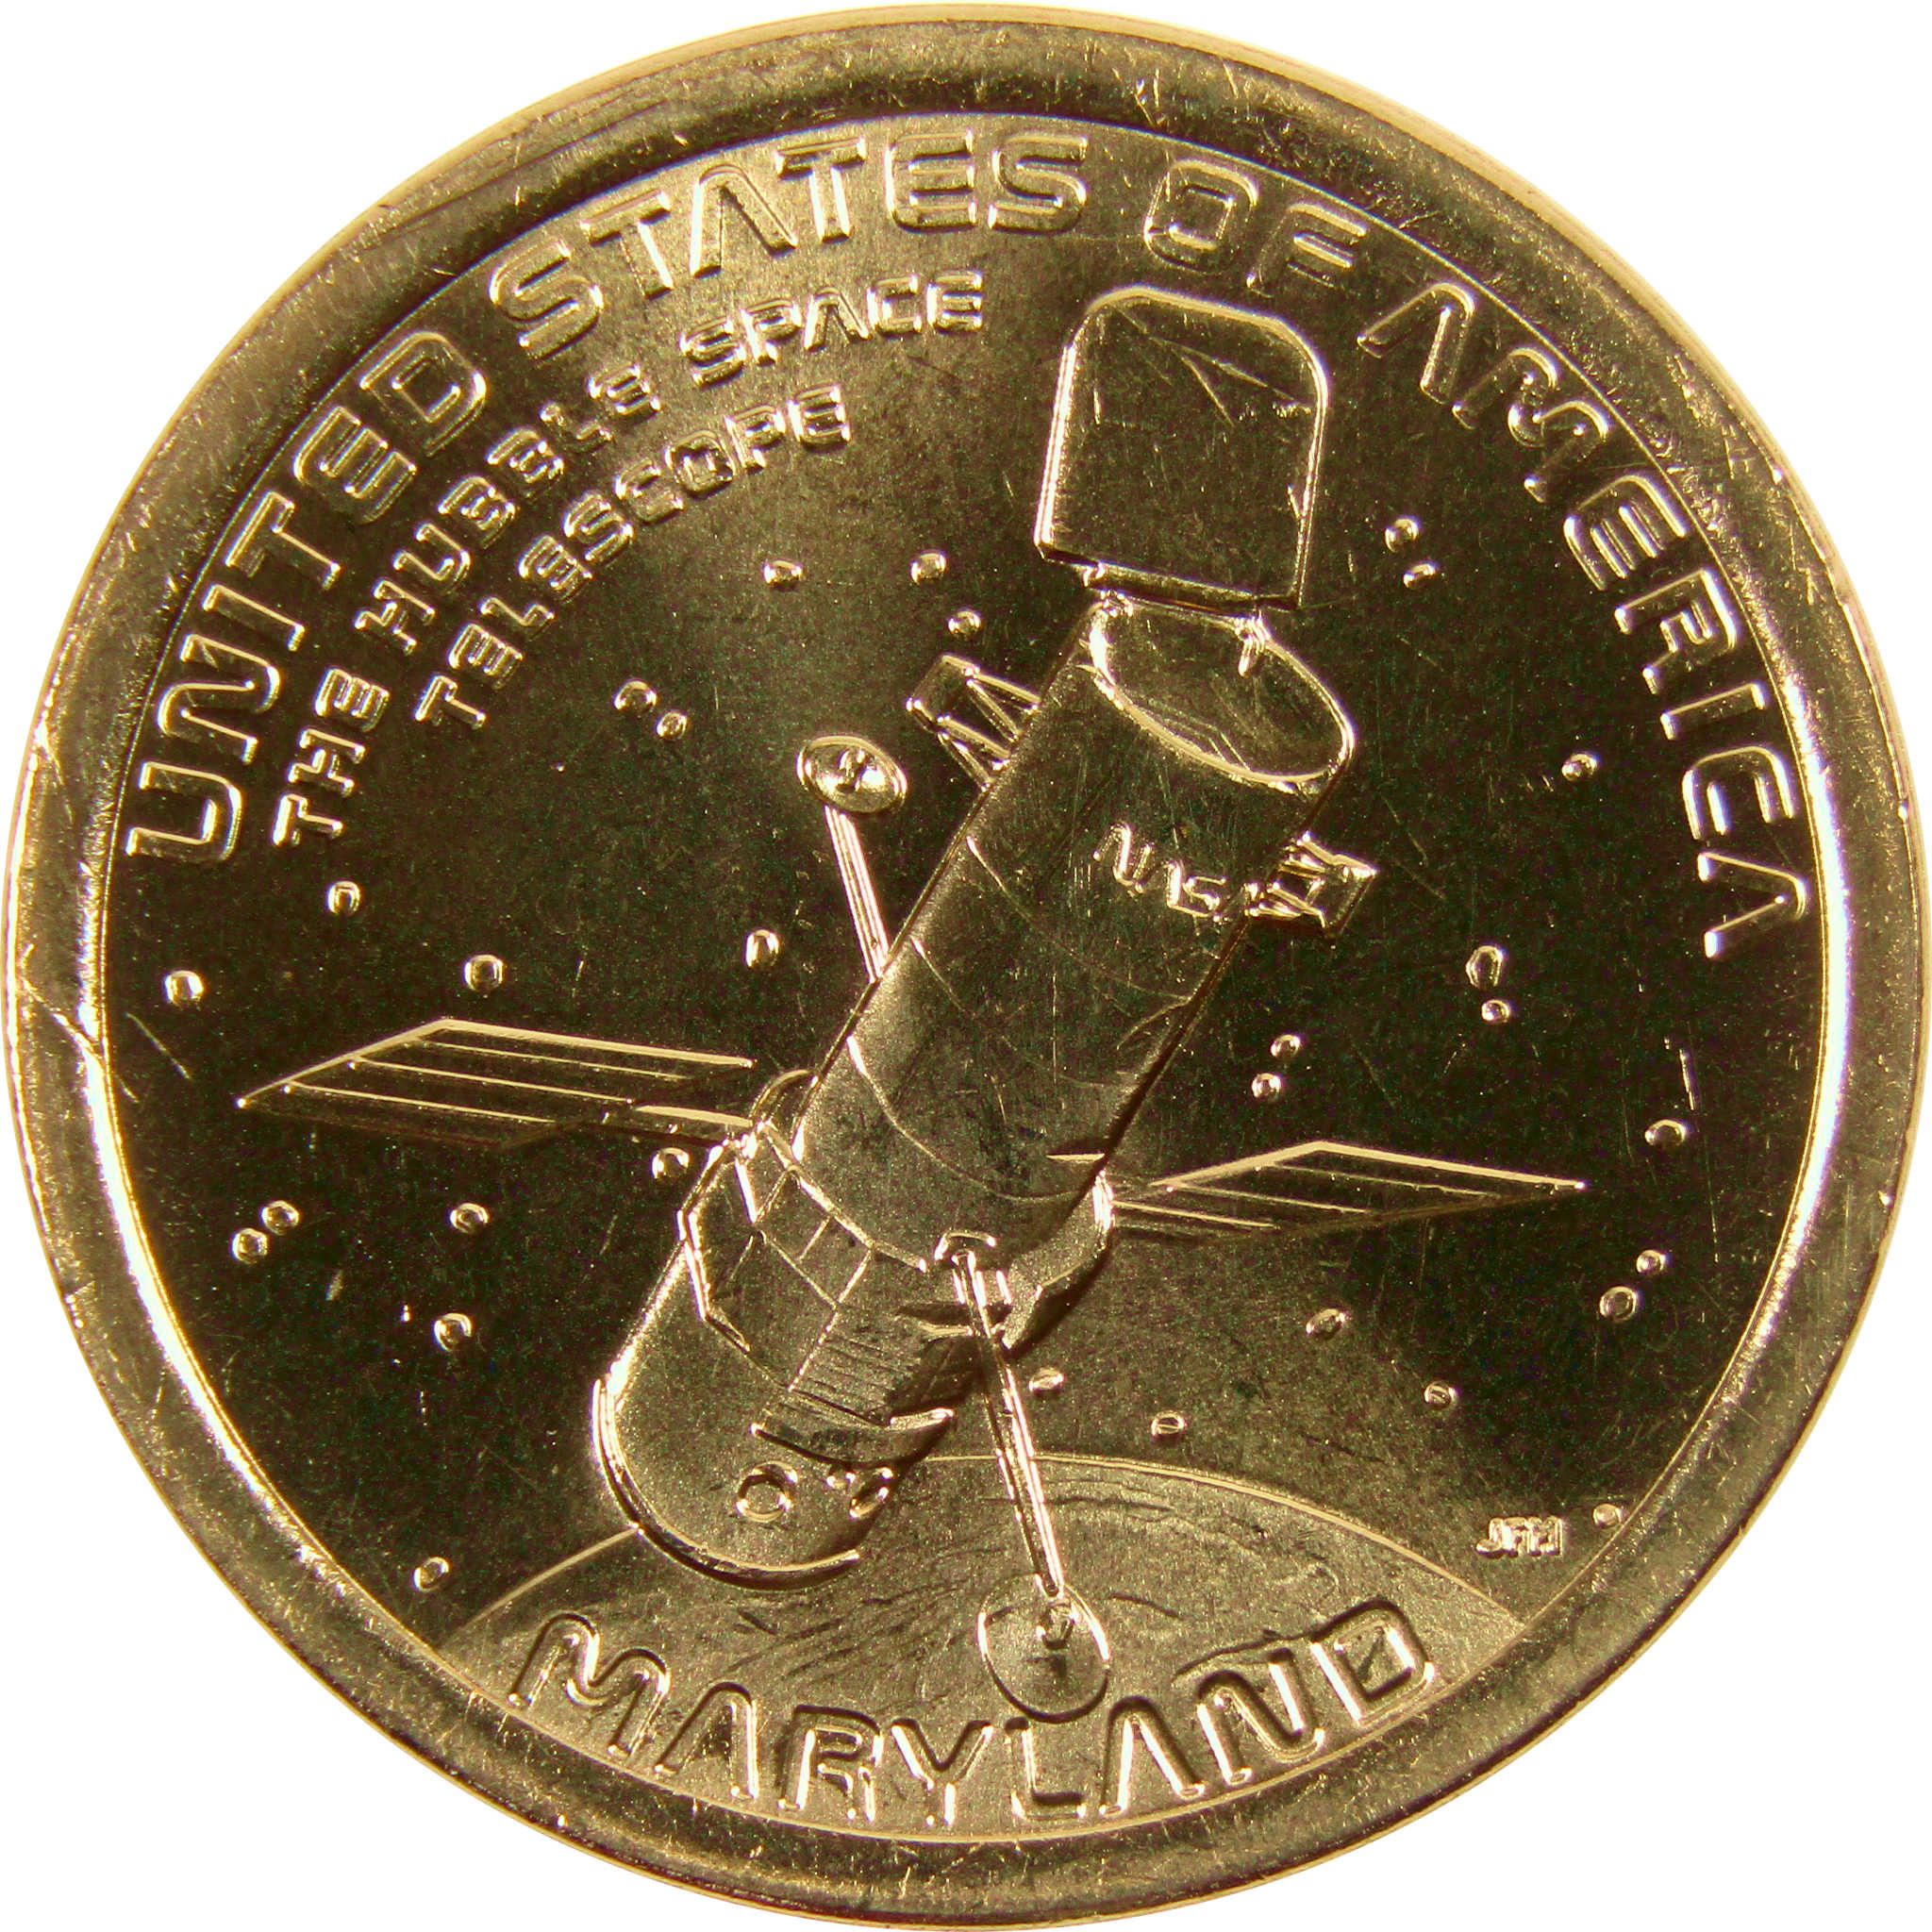 2020 D Hubble Space Telescope American Innovation Dollar Uncirculated